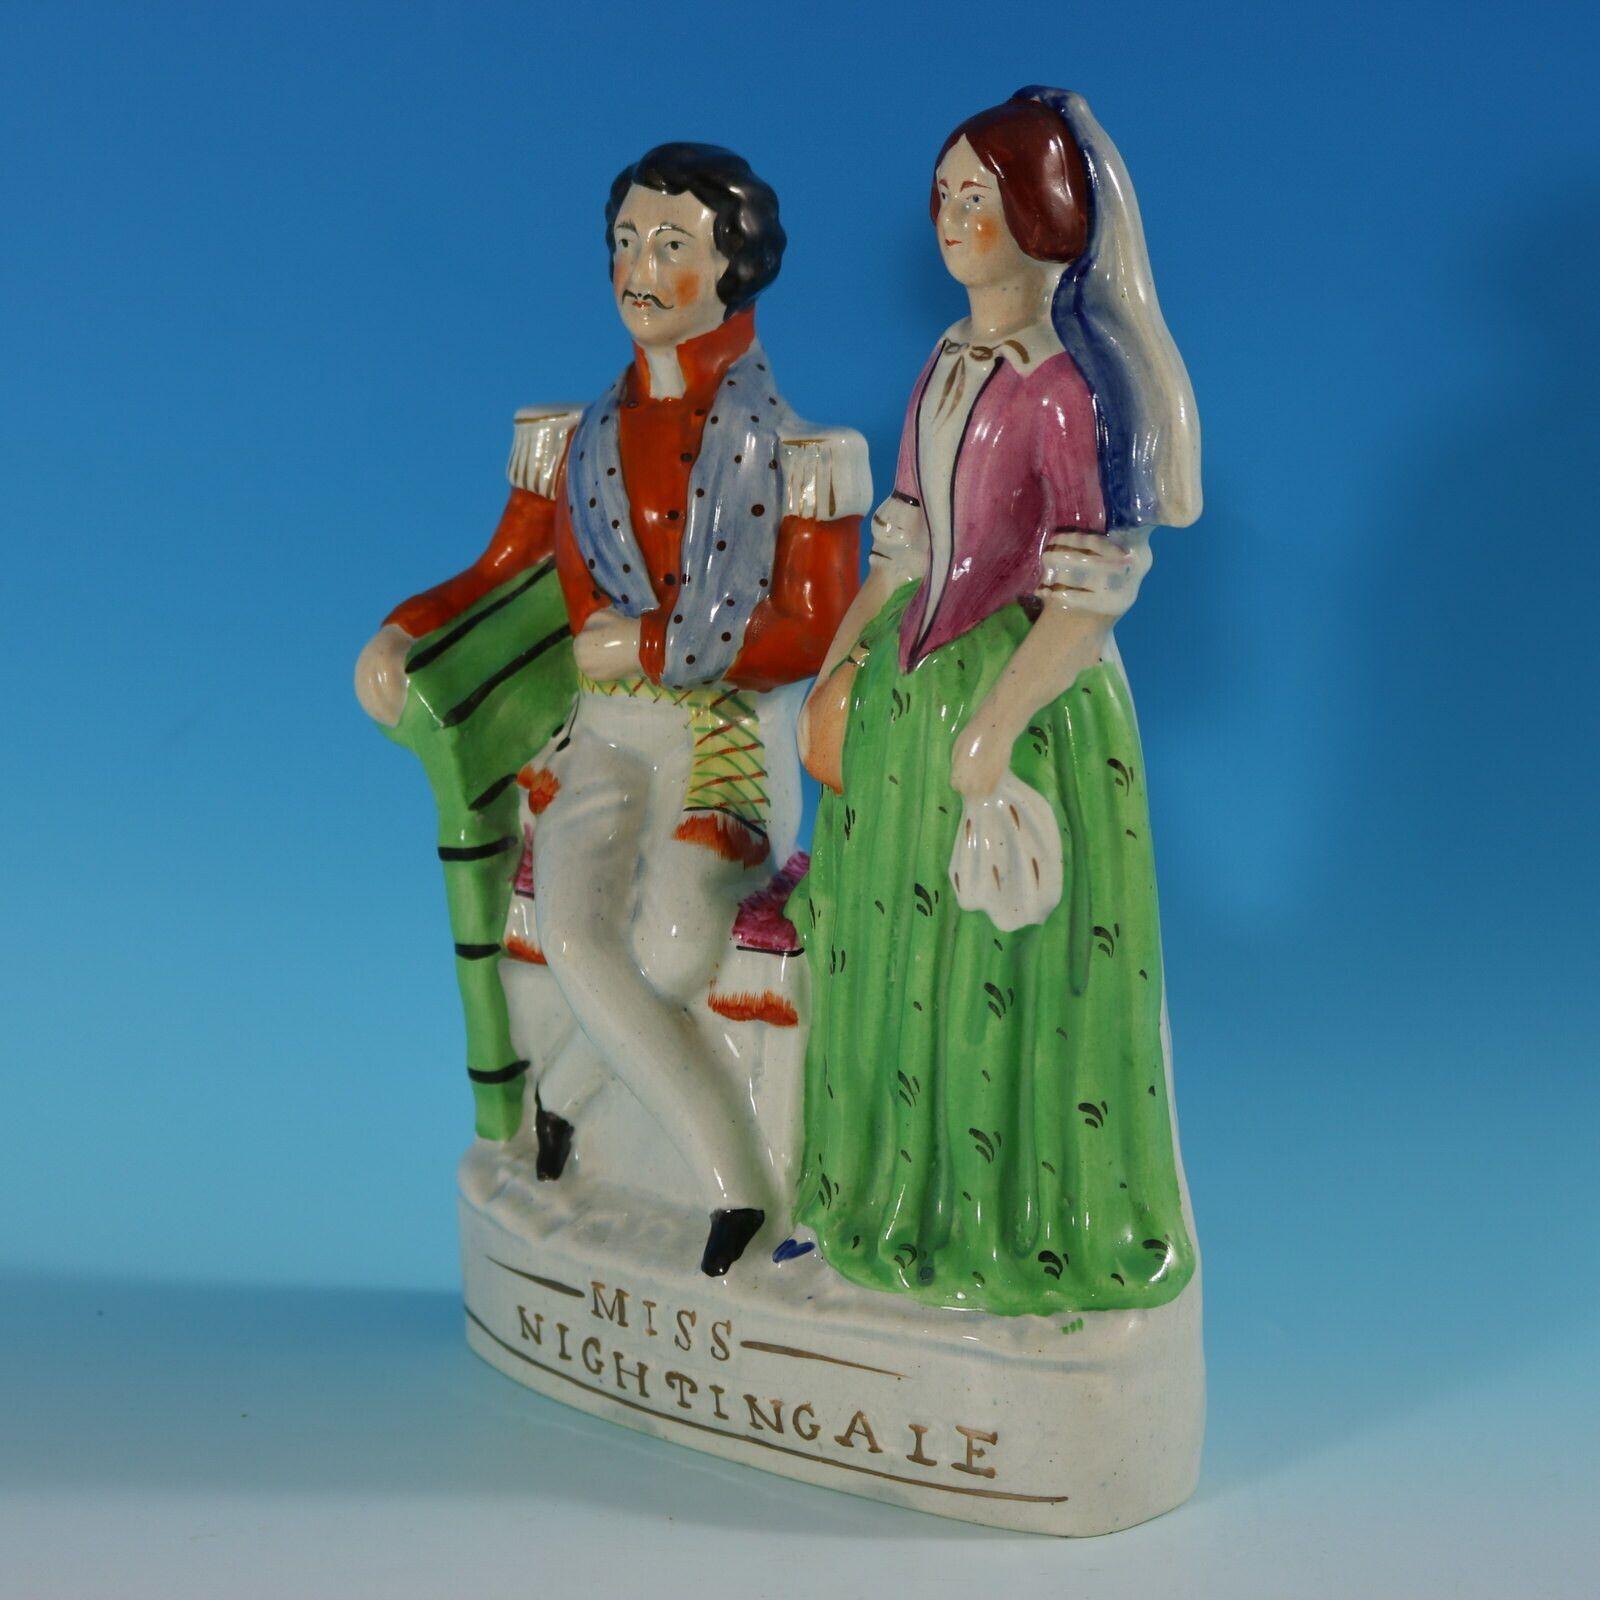 Staffordshire pottery figure with which features Florence Nightingale tending to a wounded soldier, stood on an oval base. The piece is titled, 'MISS NIGHTINGALE'. Multi-coloured version. Dull gilt embellishment. Book reference,'Victorian